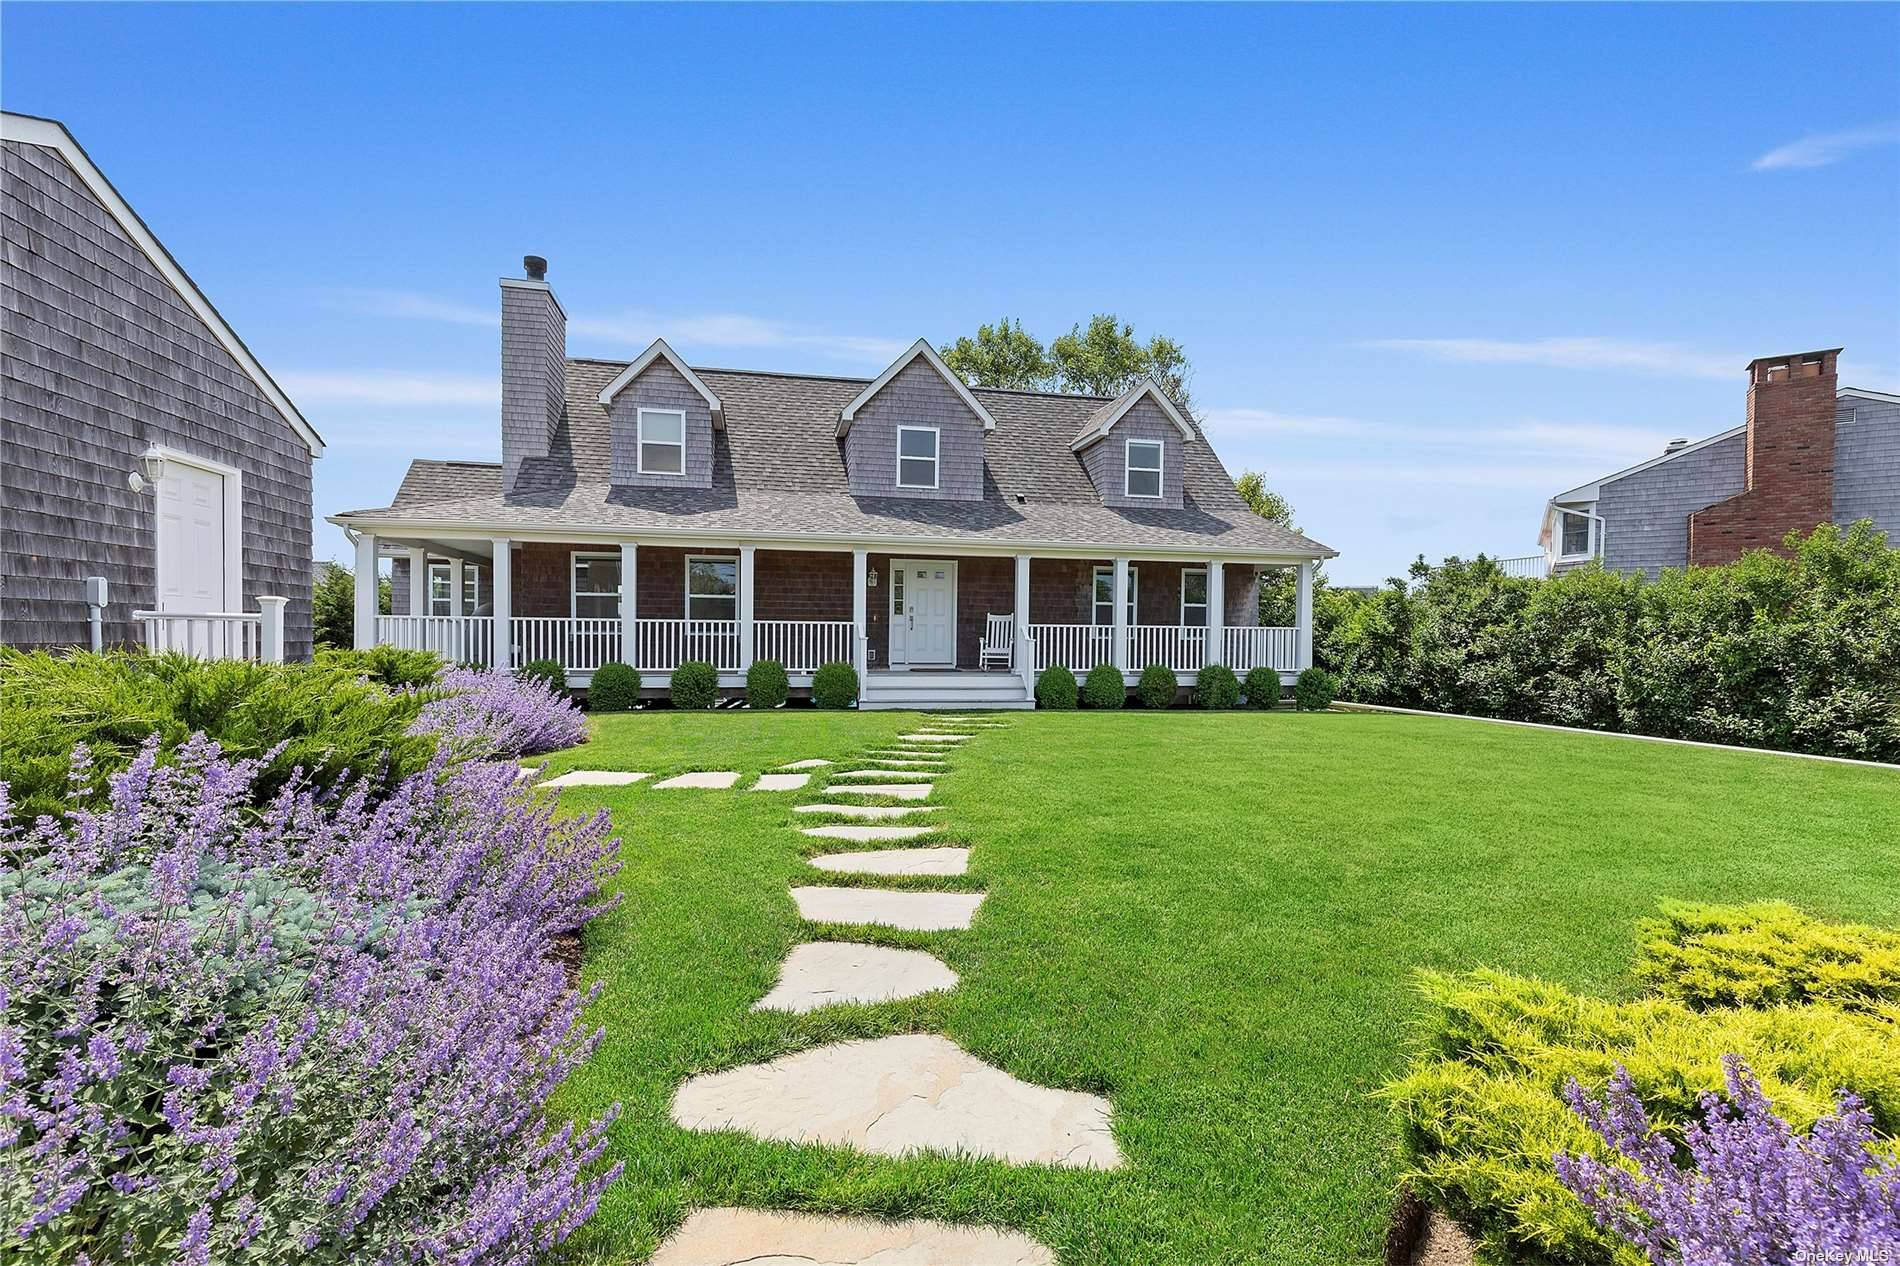 Step up and enjoy the views of Quantuck Bay at this recently renovated shingle style home and guest cottage.